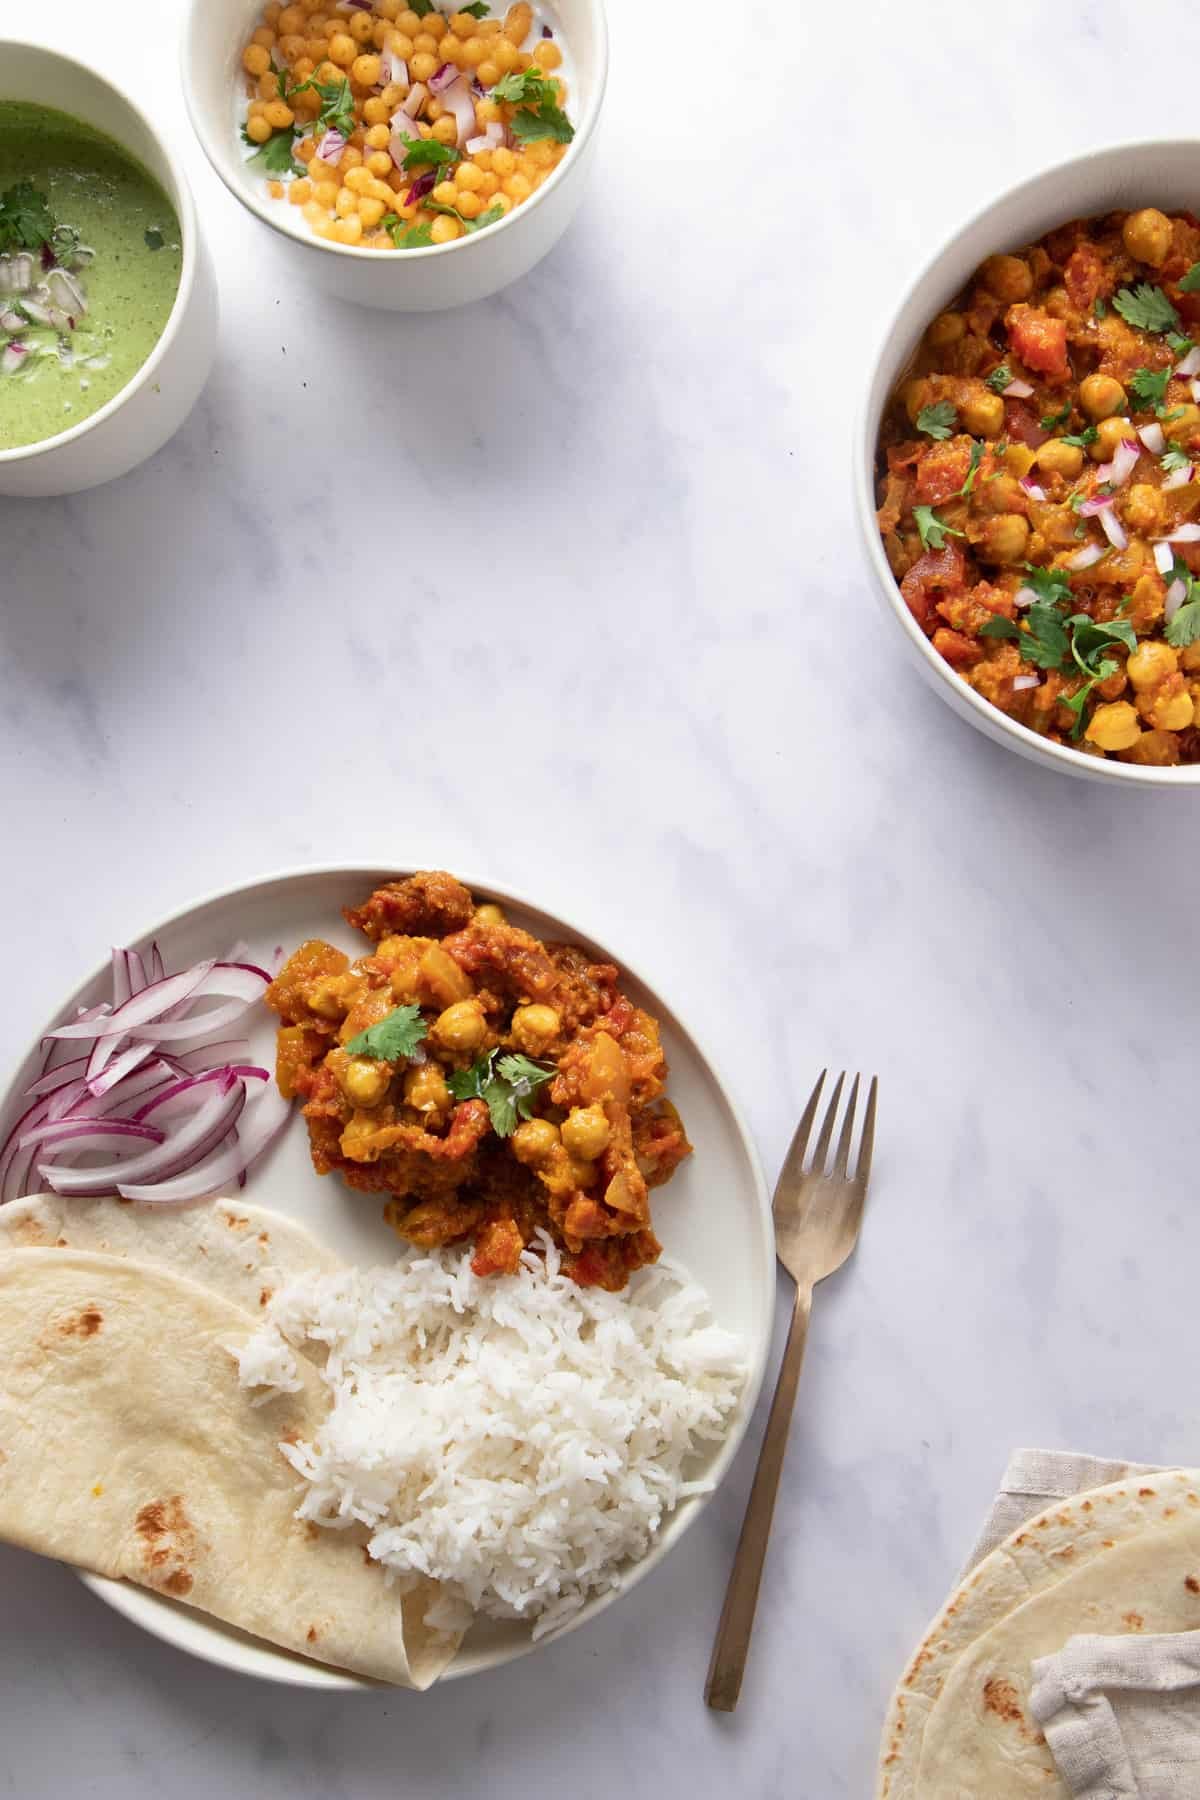 Plate with chana masala, rice and flatbread as well as a bowl of chana masala and raita in the background